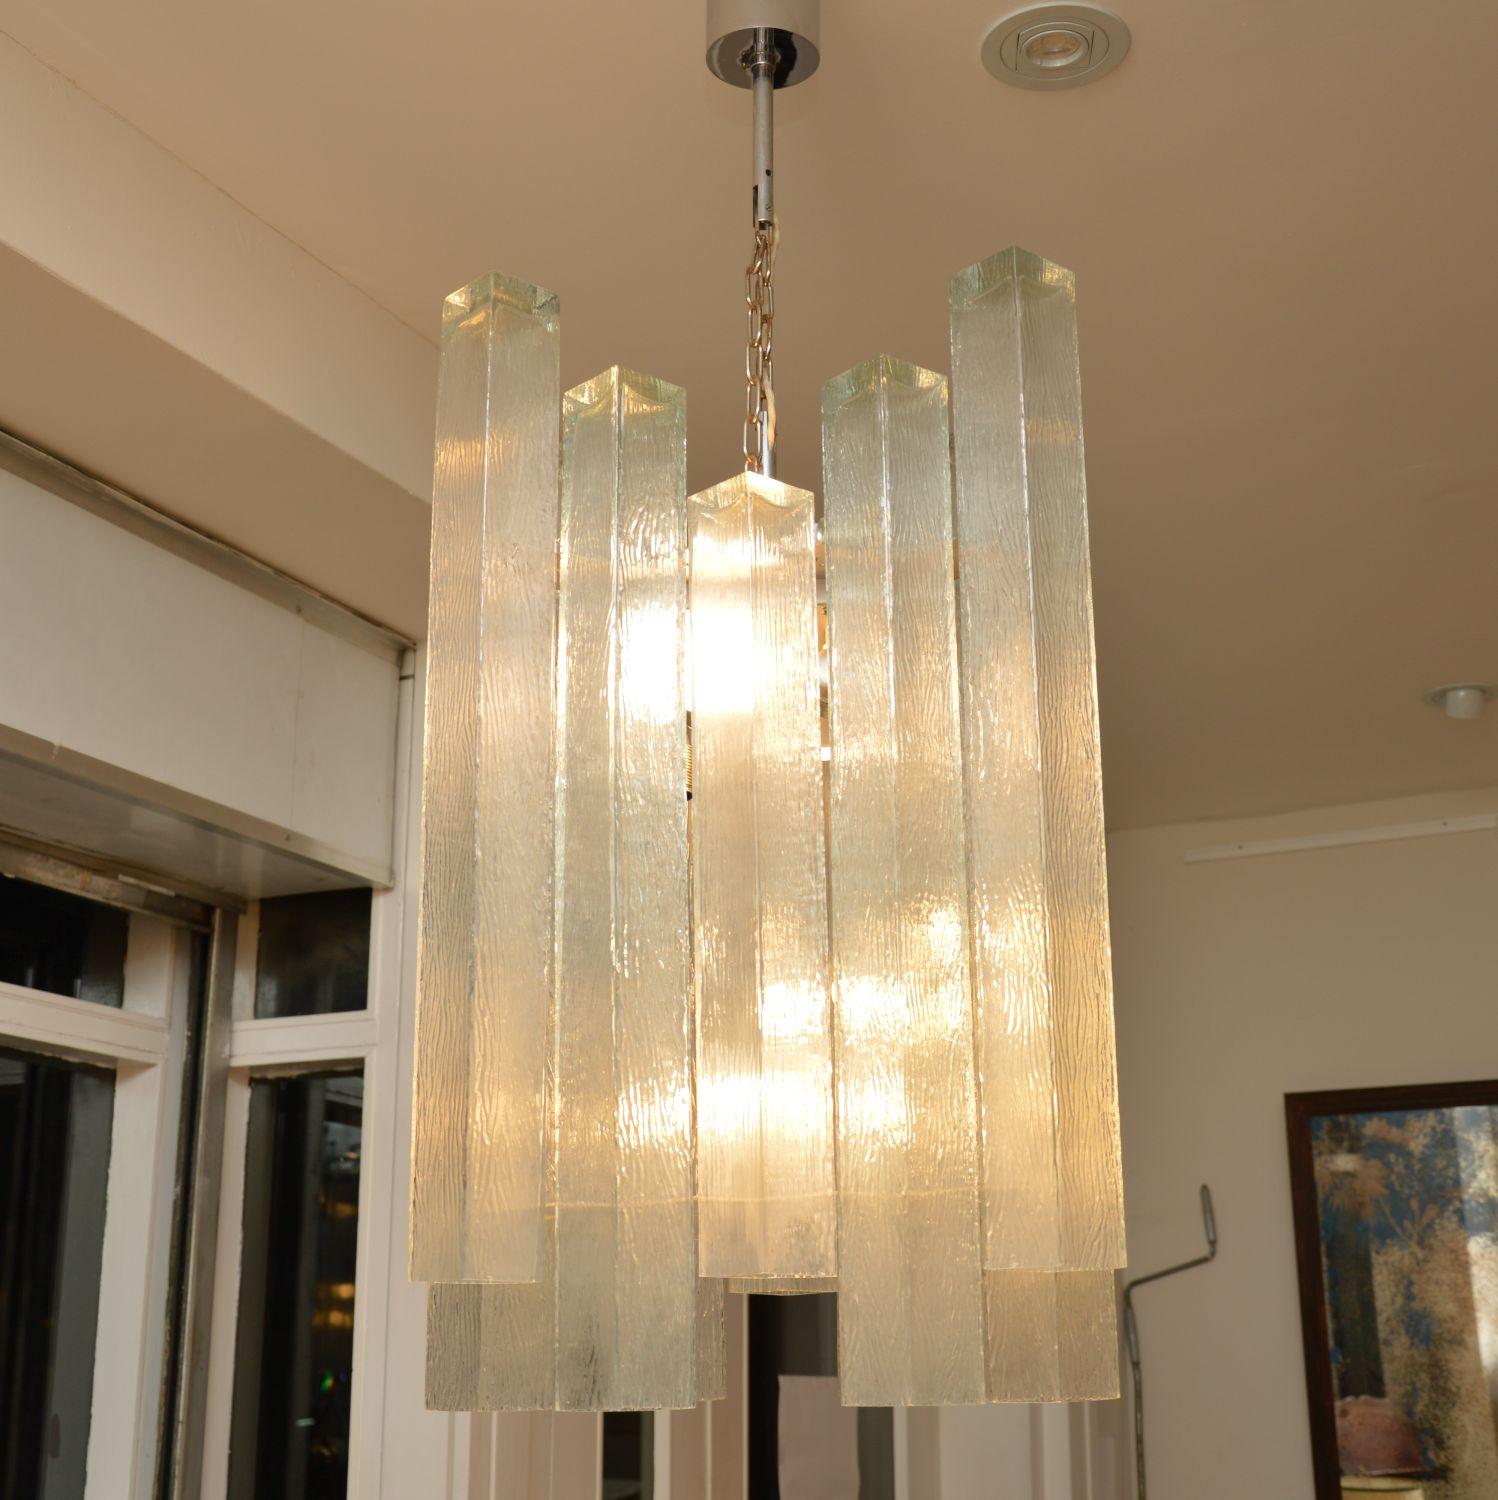 A stunning pair of vintage glass and chrome chandeliers, these were made in Germany in the 1960s by Doria Leuchten. They are of fabulous quality, they’re very large and impressive. These came straight out of the London home of a very famous